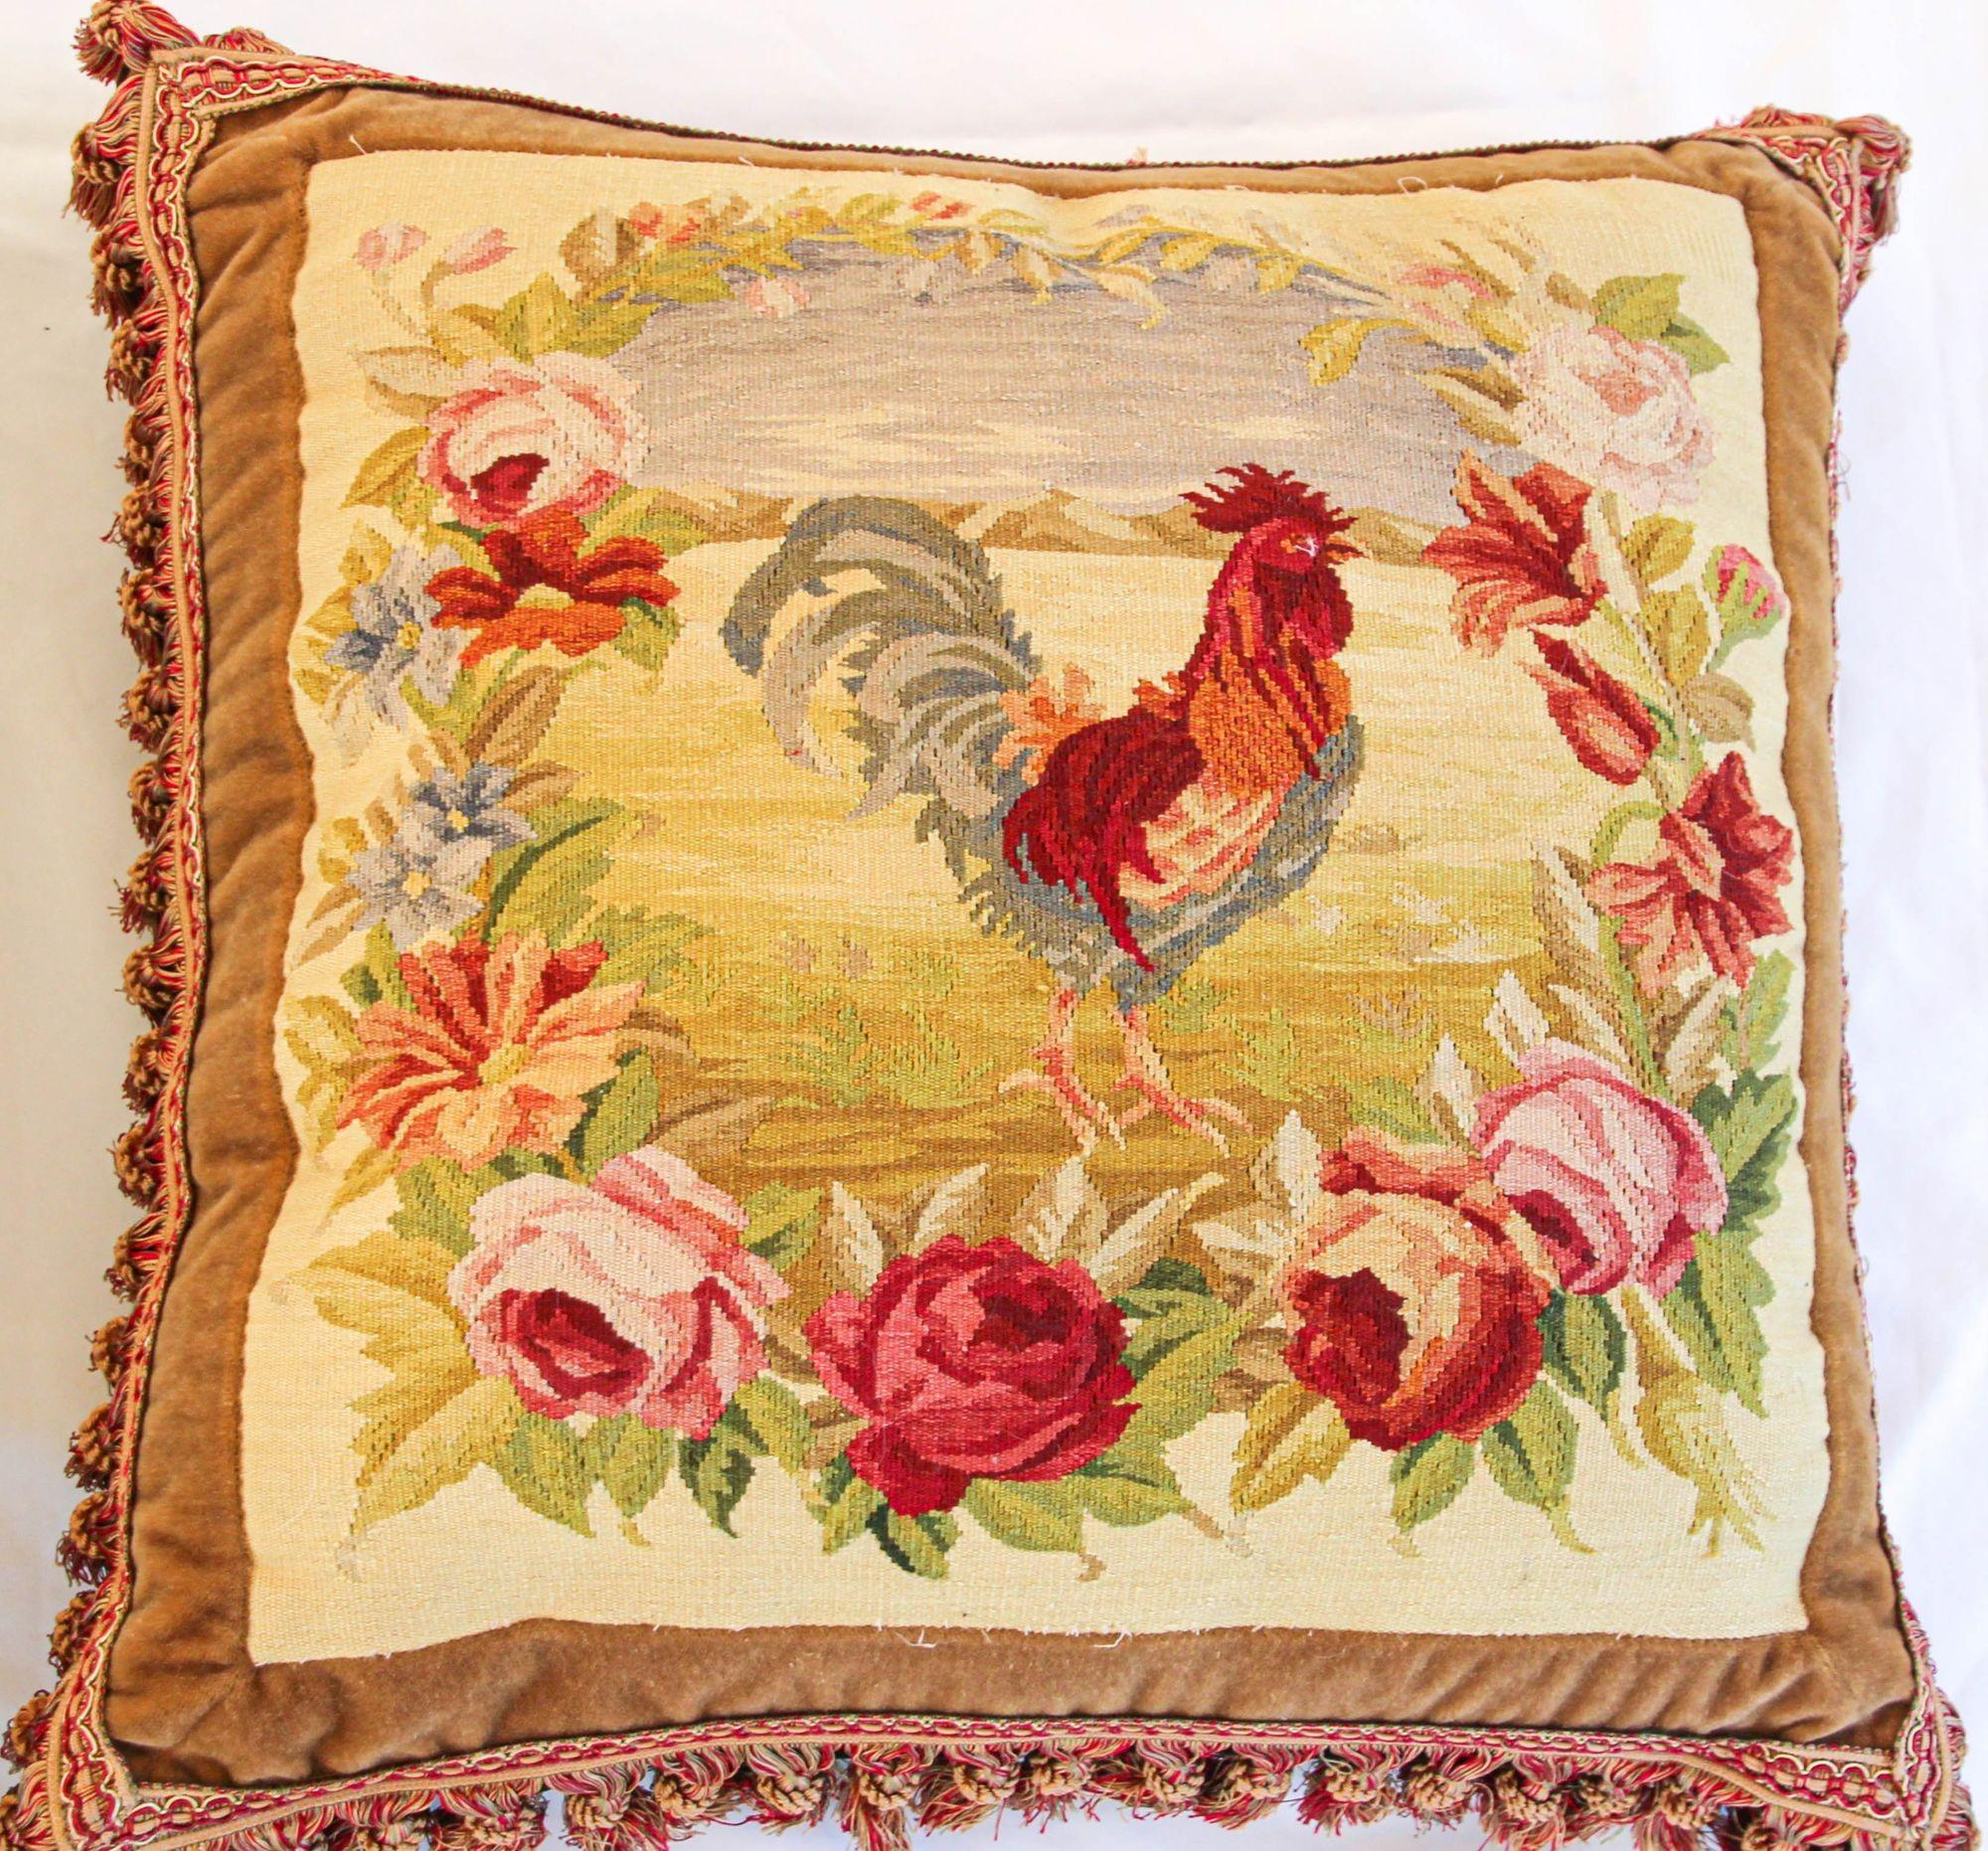 Hand-Crafted Antique Aubusson Tapestry Pillows with Rooster and Roses French Provincial